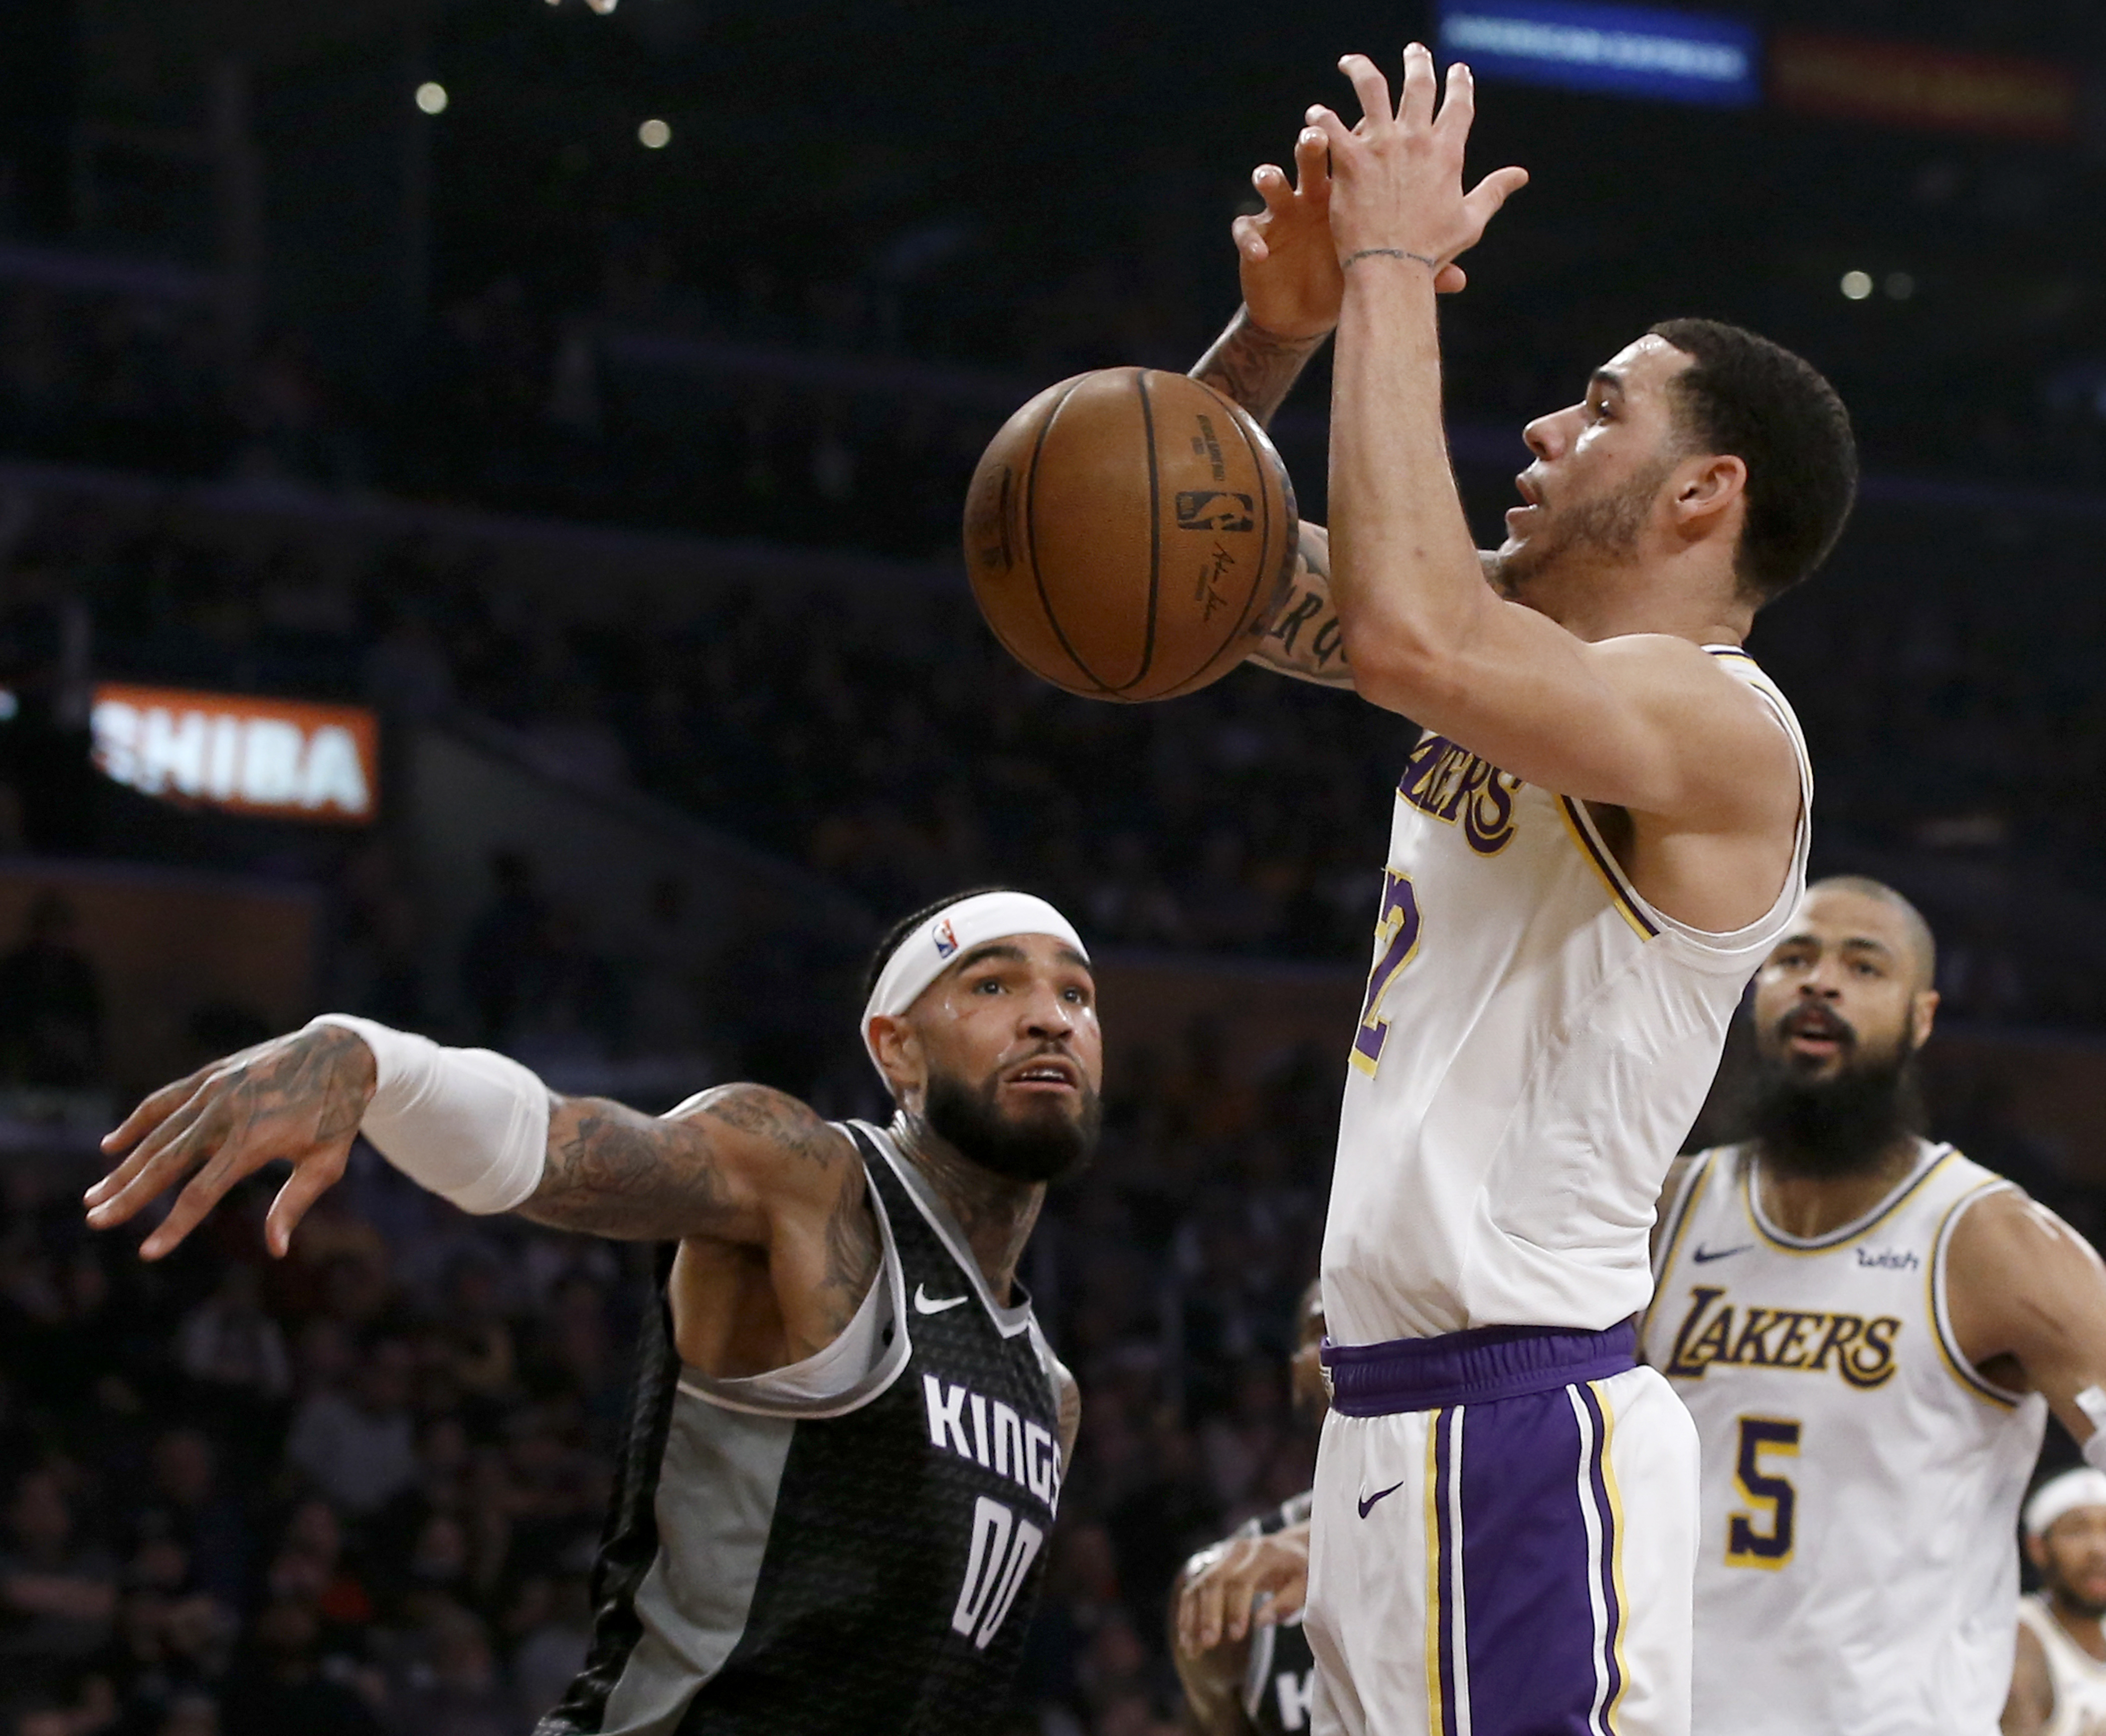 Lakers rally in 4th quarter, defeat Kings 121-112